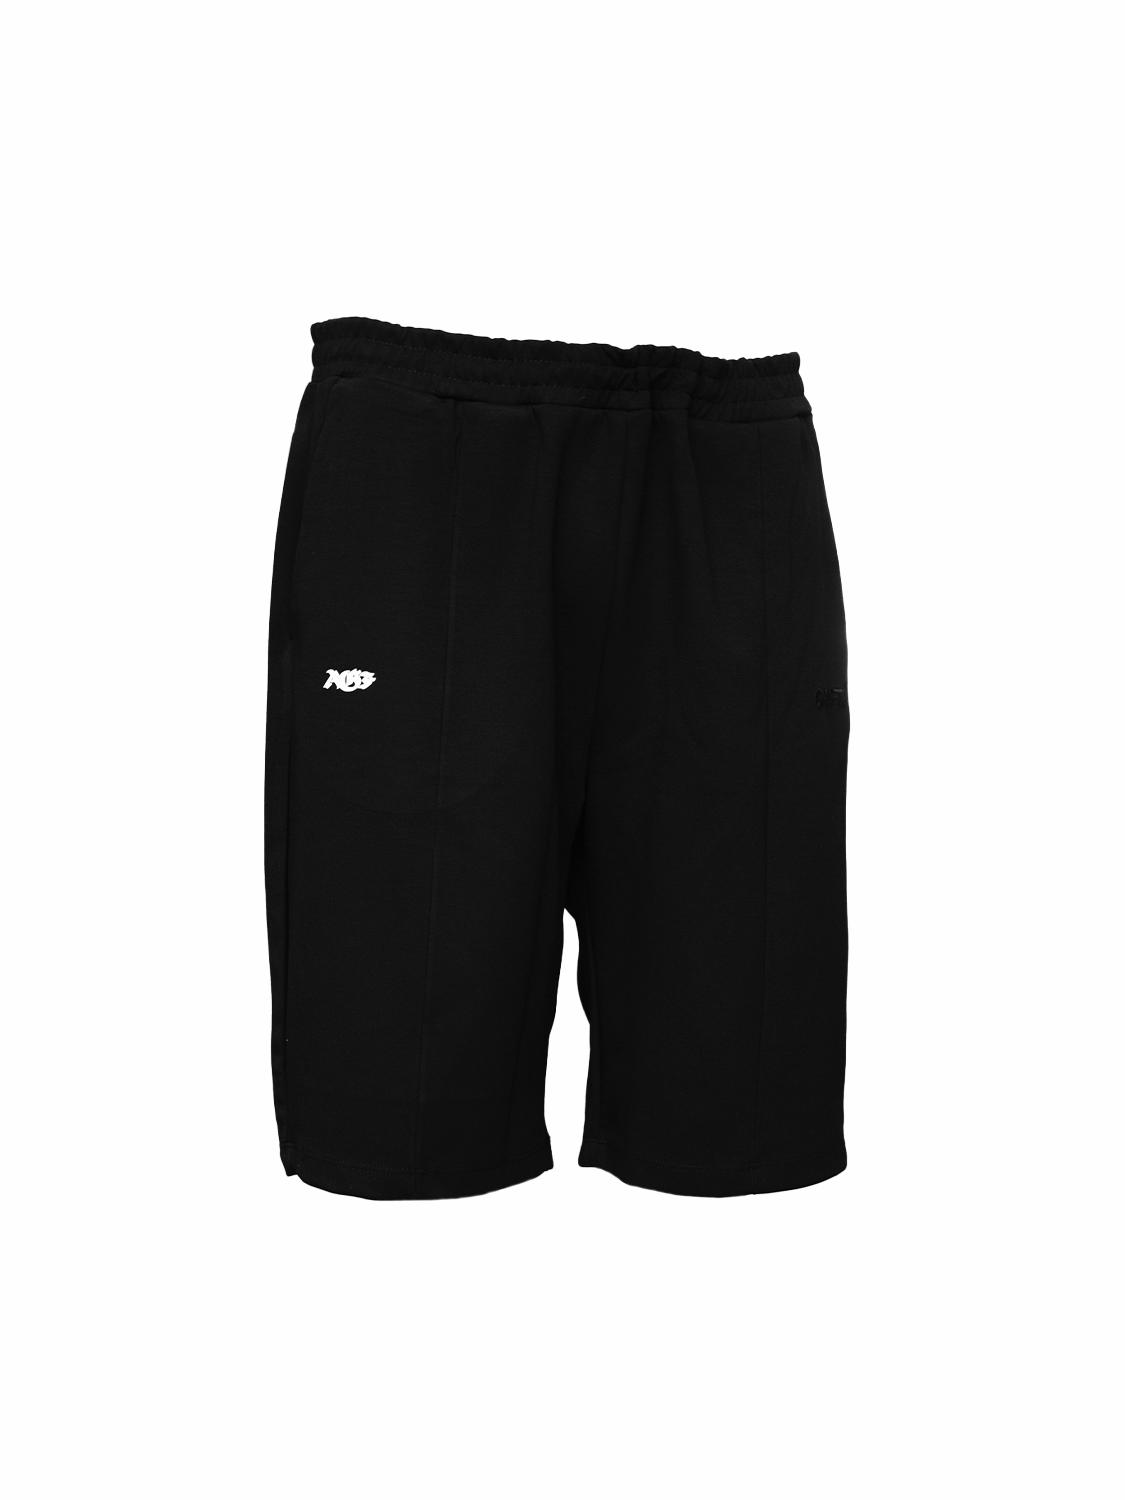 Craft Join shorts